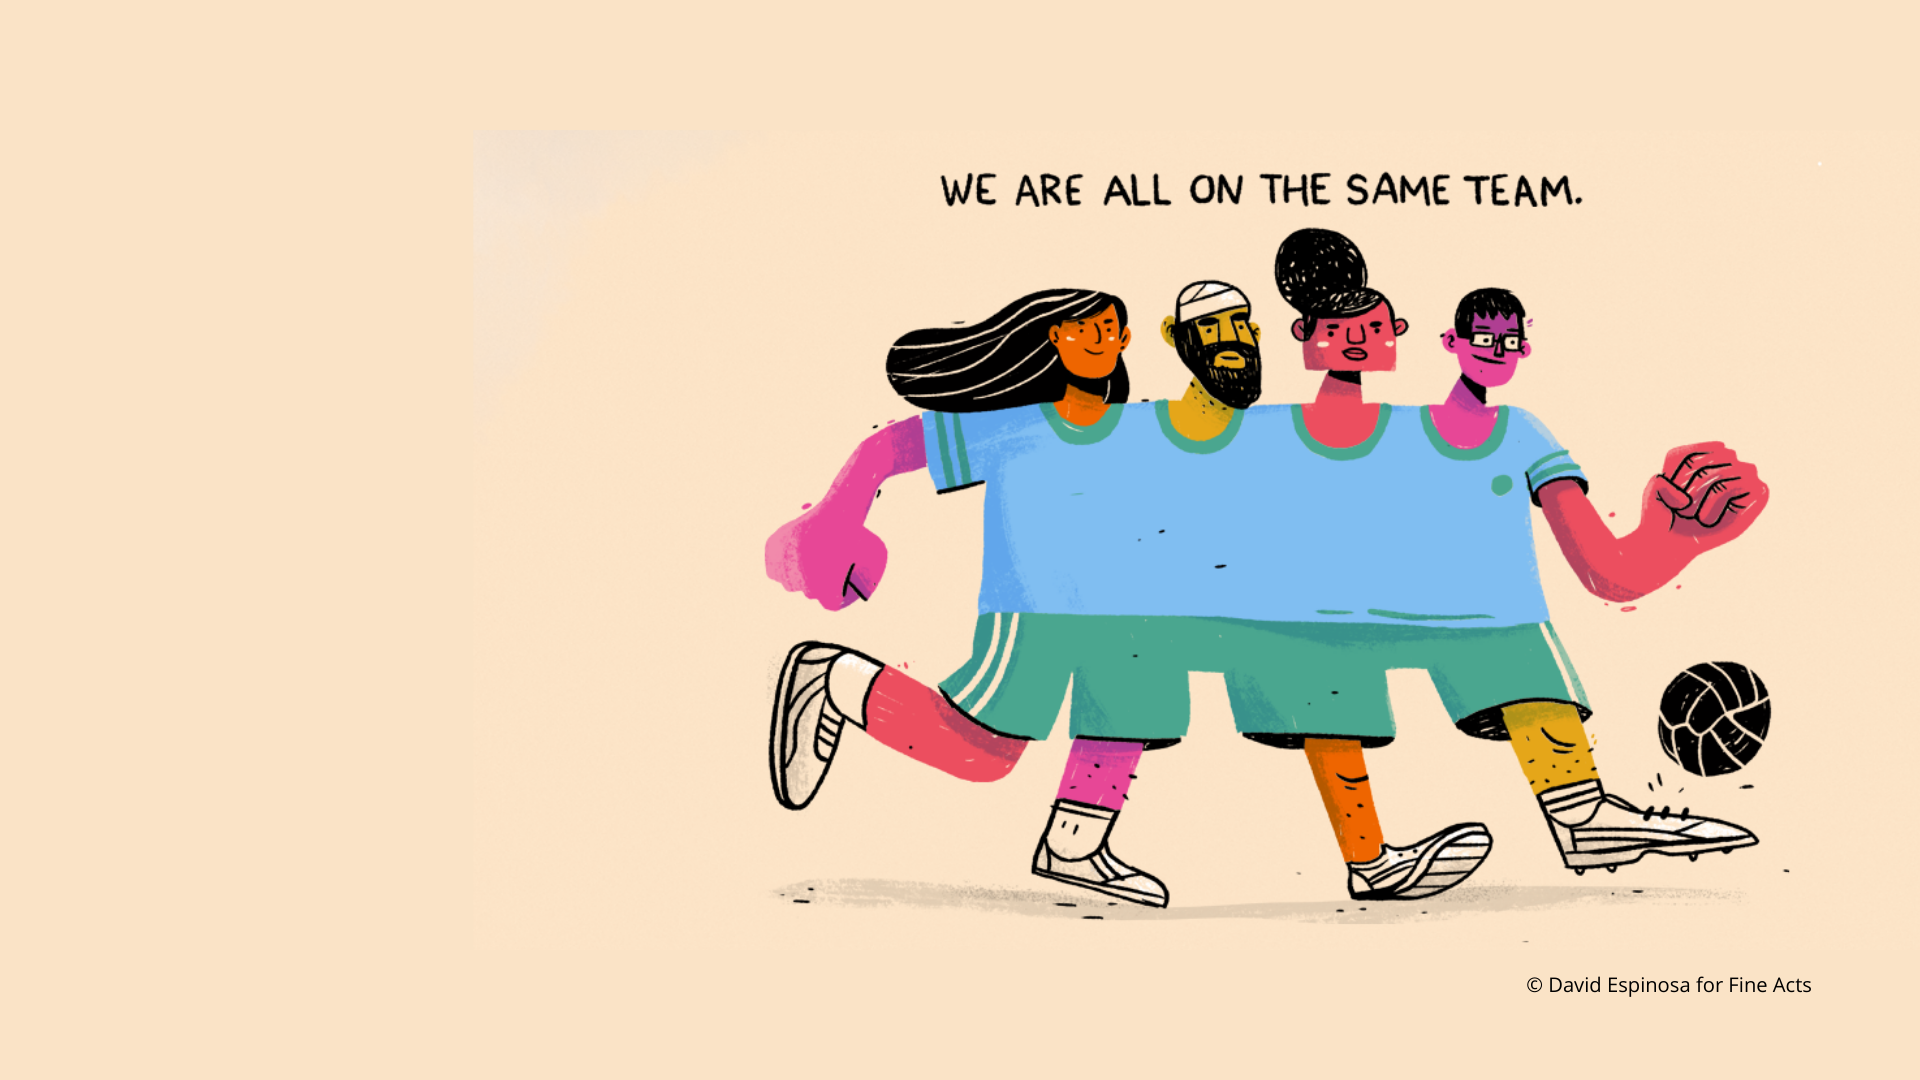 colourful illustration of 4 people, connected with one big blue shirt running after a socer ball. The illustration has the headline: "We are all on the same team."